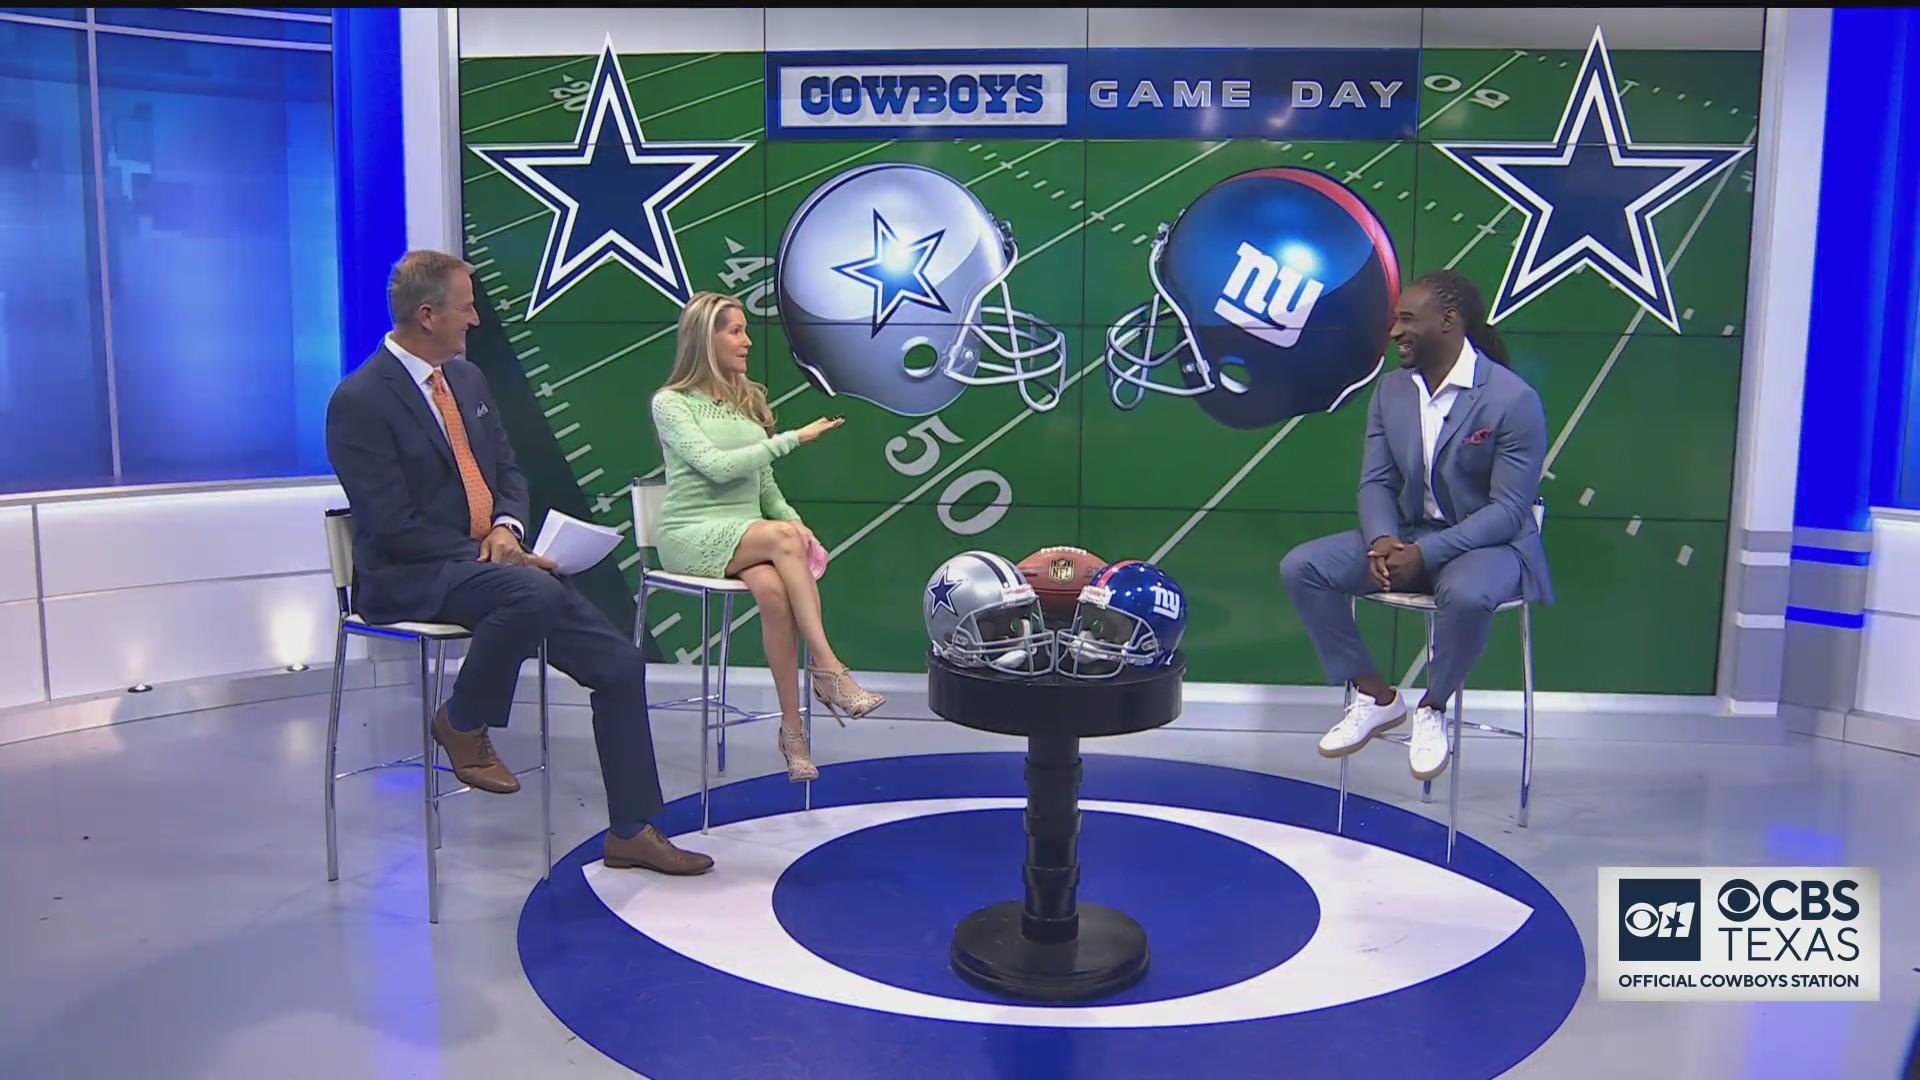 Are you ready for the first Cowboys game of the season? - CBS Texas